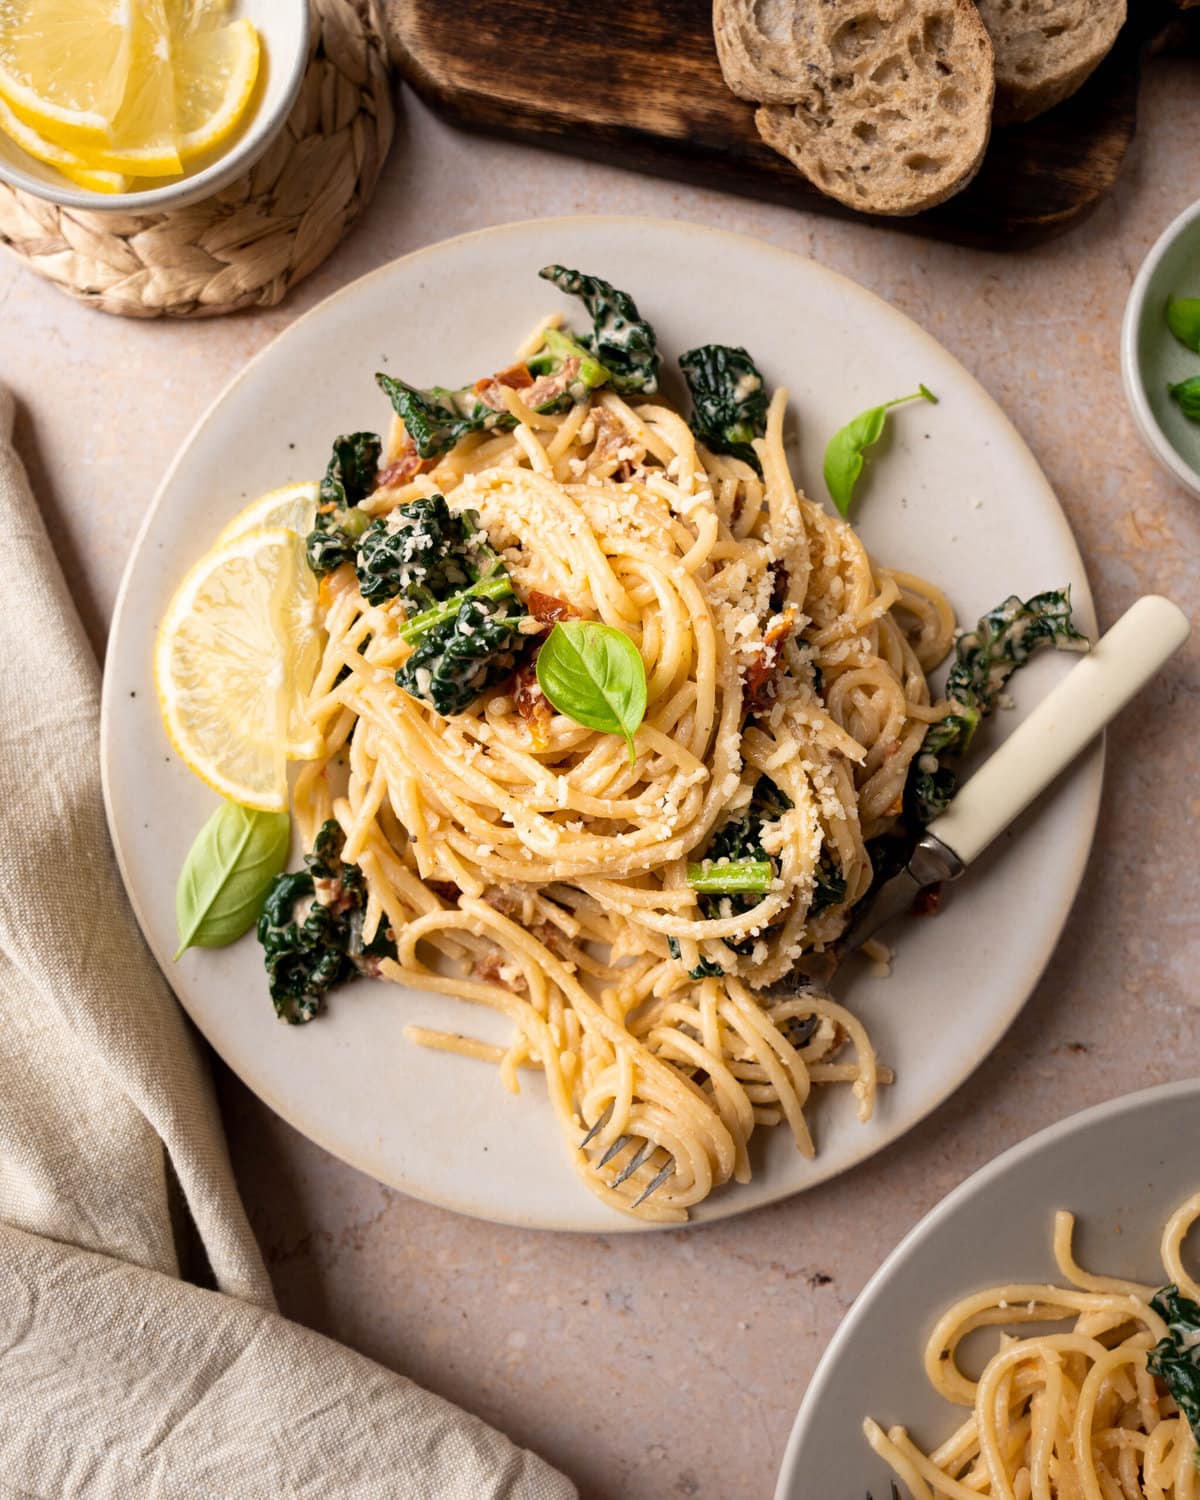 Simple spaghetti noodles and kale garnished with basil on a white plate.